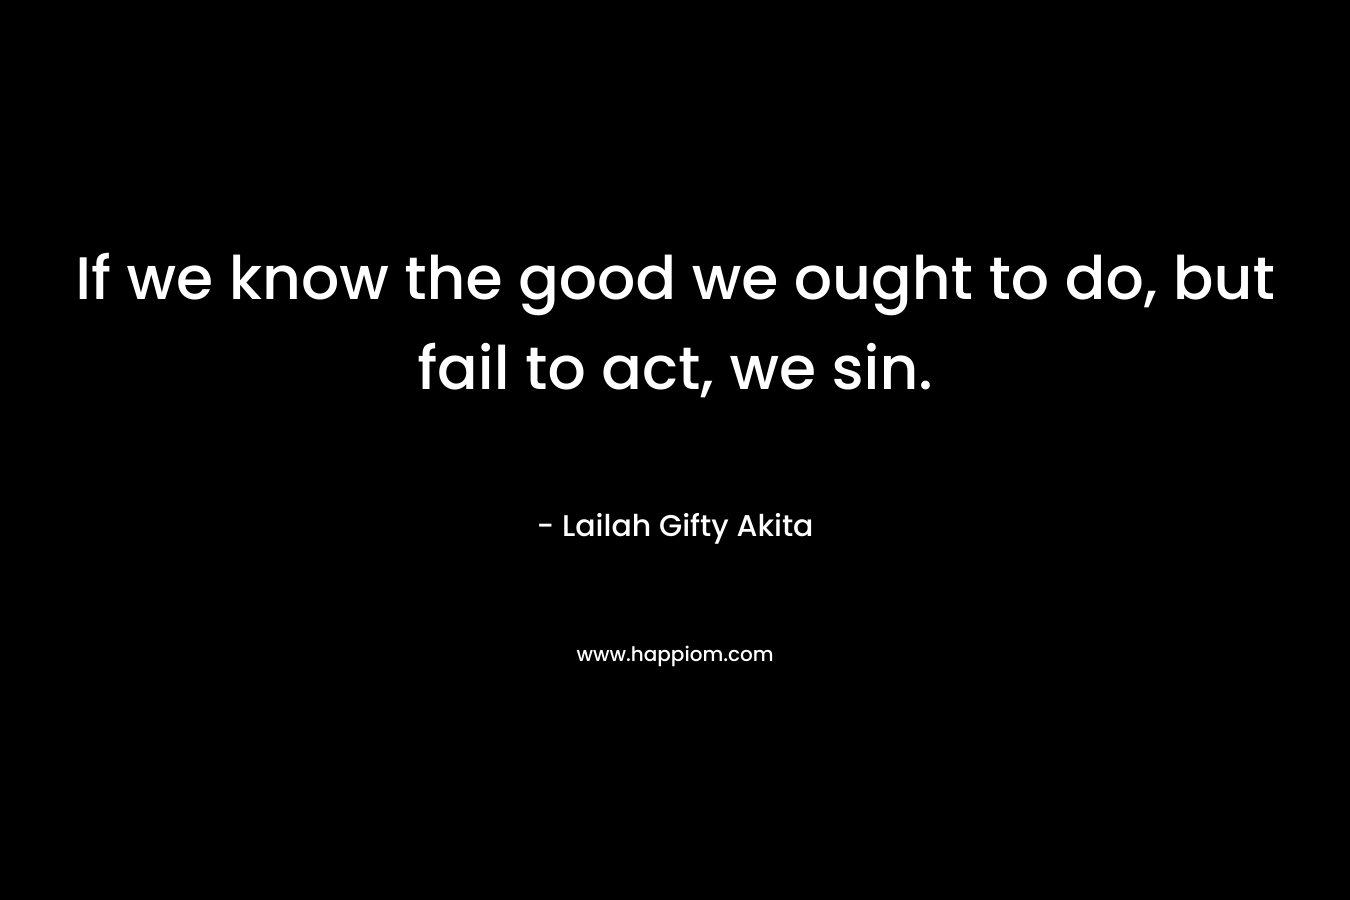 If we know the good we ought to do, but fail to act, we sin.